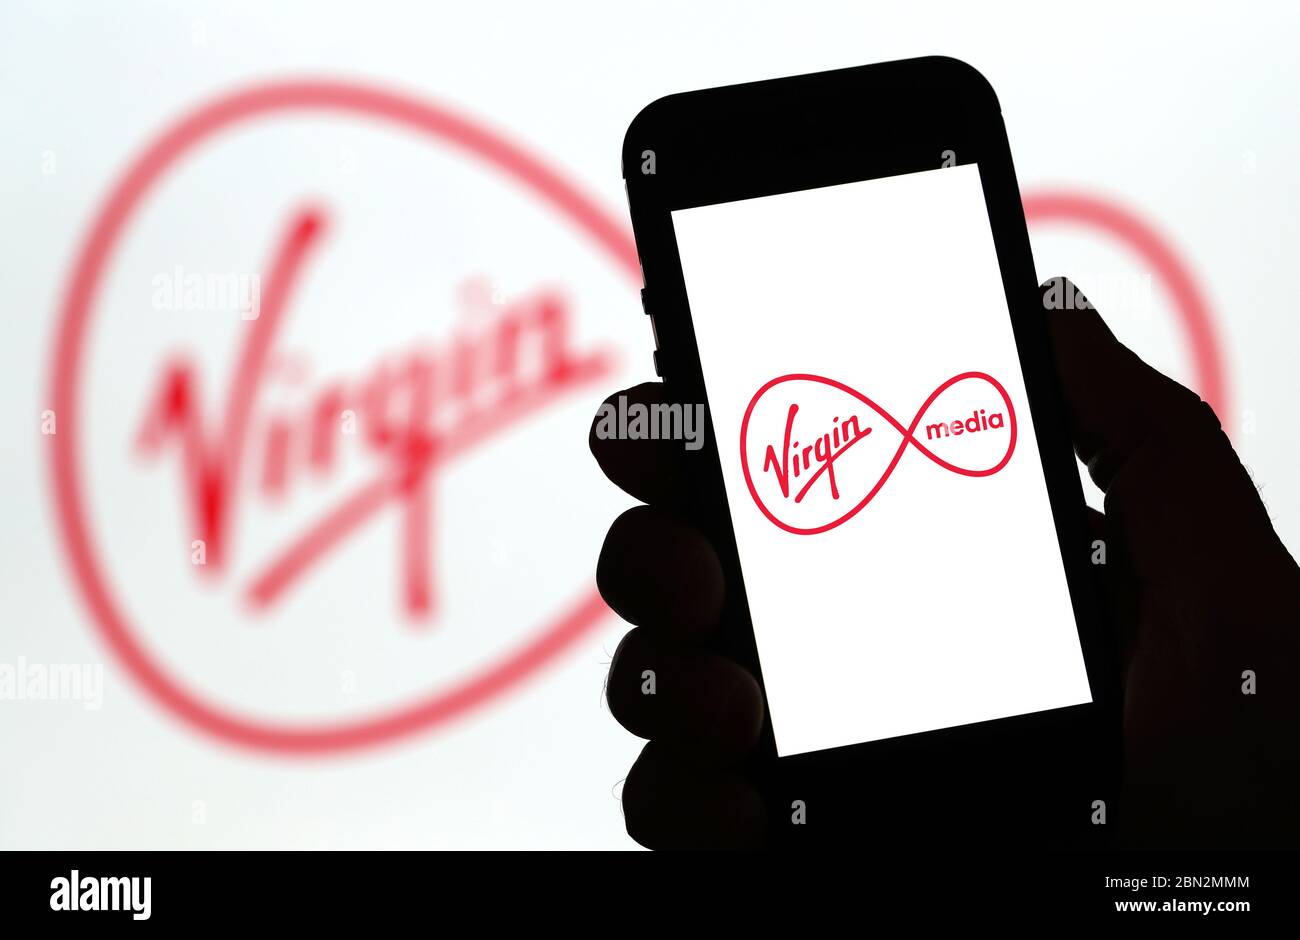 Virgin Media mobile phone network logo on a mobile phone (Editorial use  only Stock Photo - Alamy